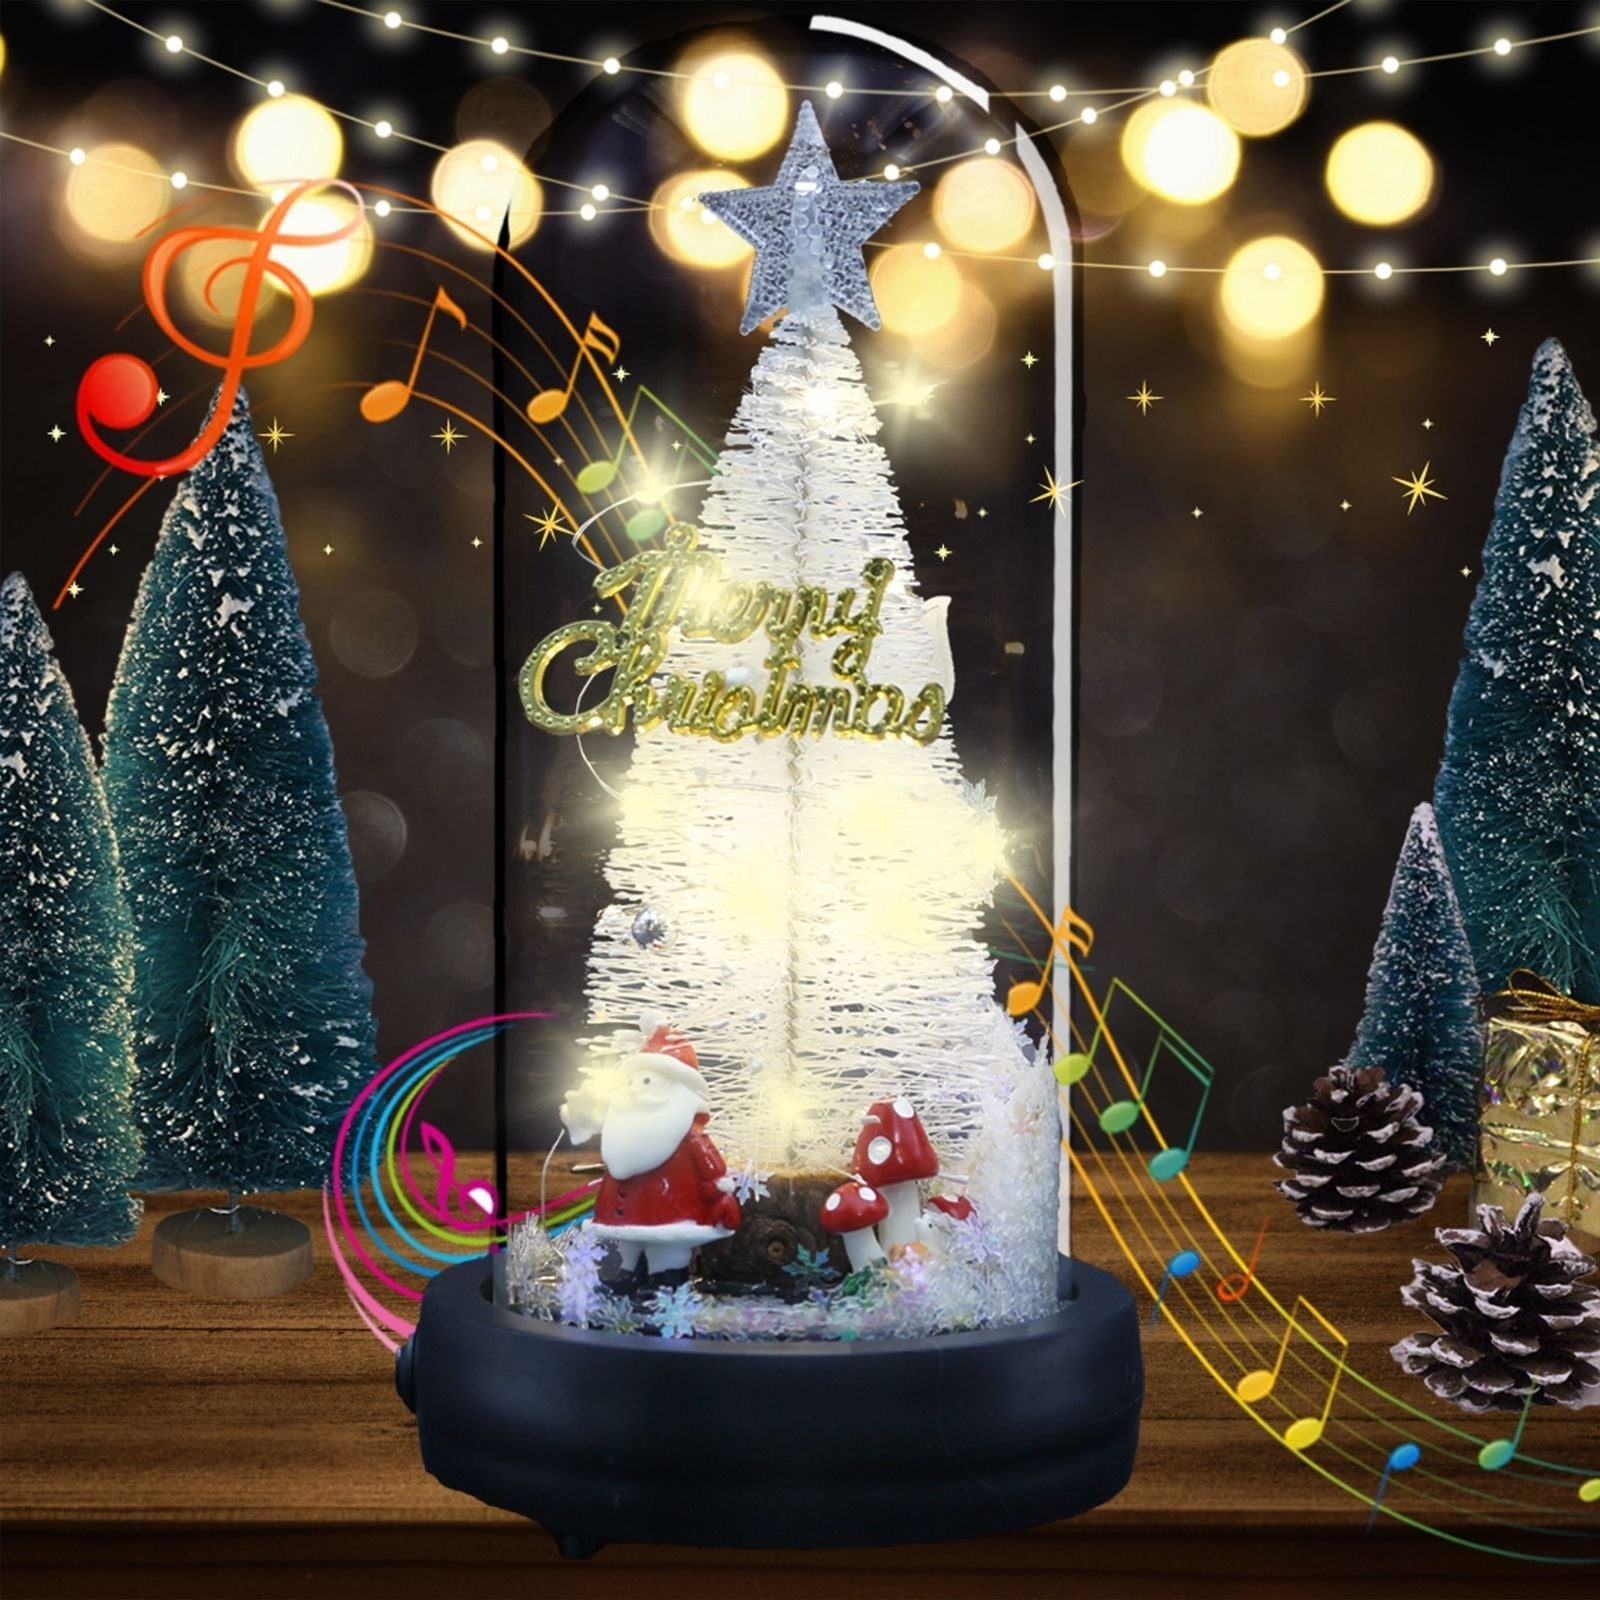 uniqicon LED Christmas Tree Music Box in Glass Dome with Santa Claus, Snowflakes Decorations Tree Present, Indoor Home Decor Gifts, Christmas Music Wooden Box Gifts for Girls Women Mom Friend - uniqicon